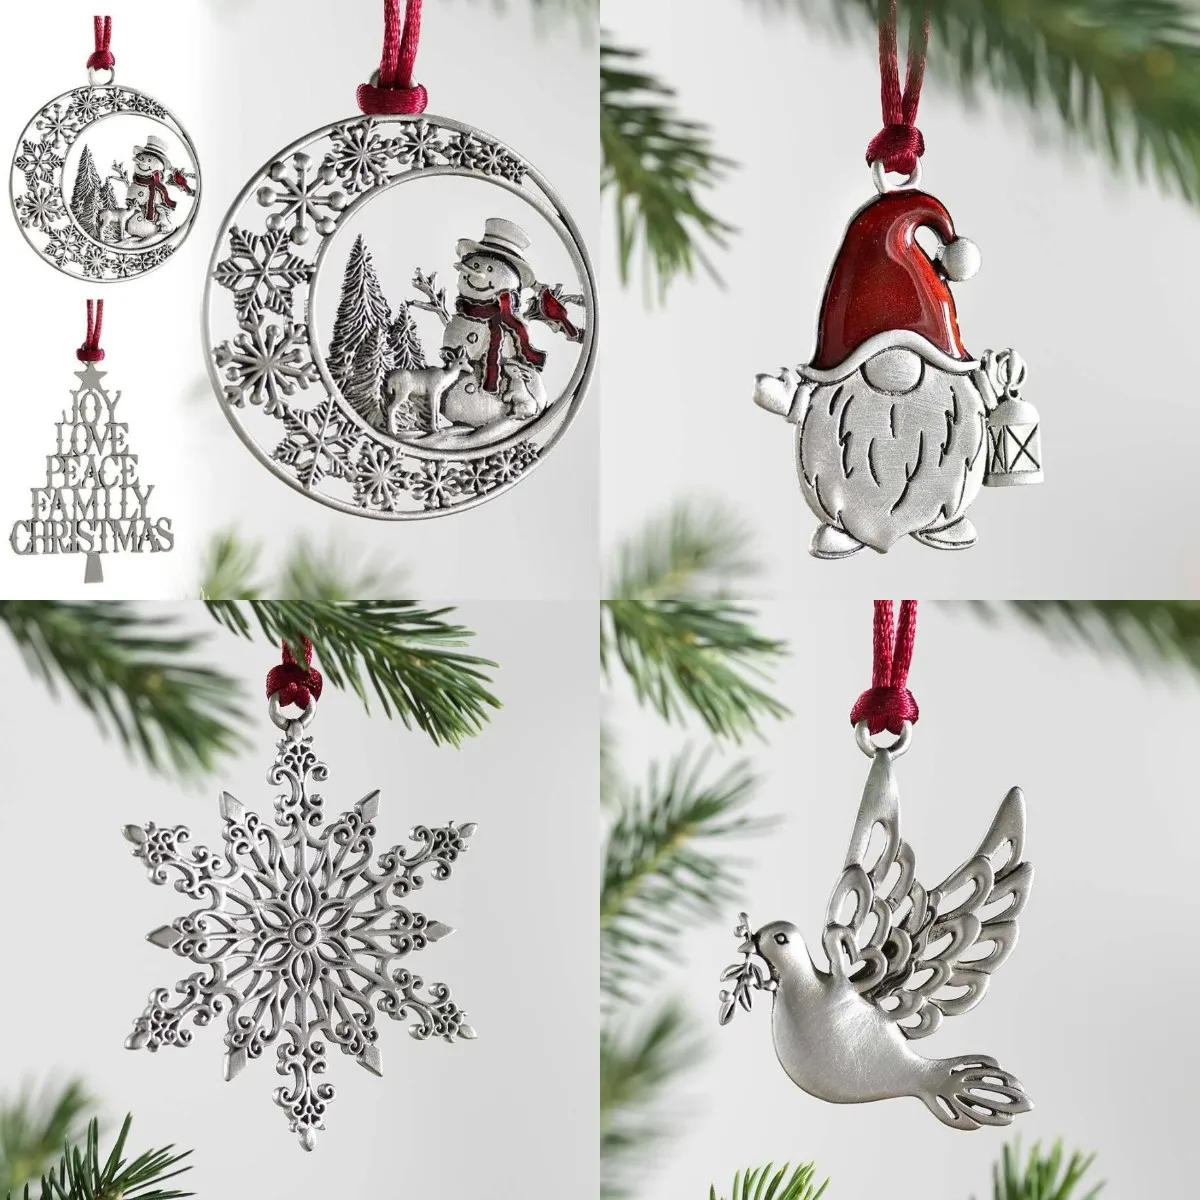 2022 Christmas Tree Decorations Christmas Ornament Metal Snowman Deer Pendant Party New Year Gifts